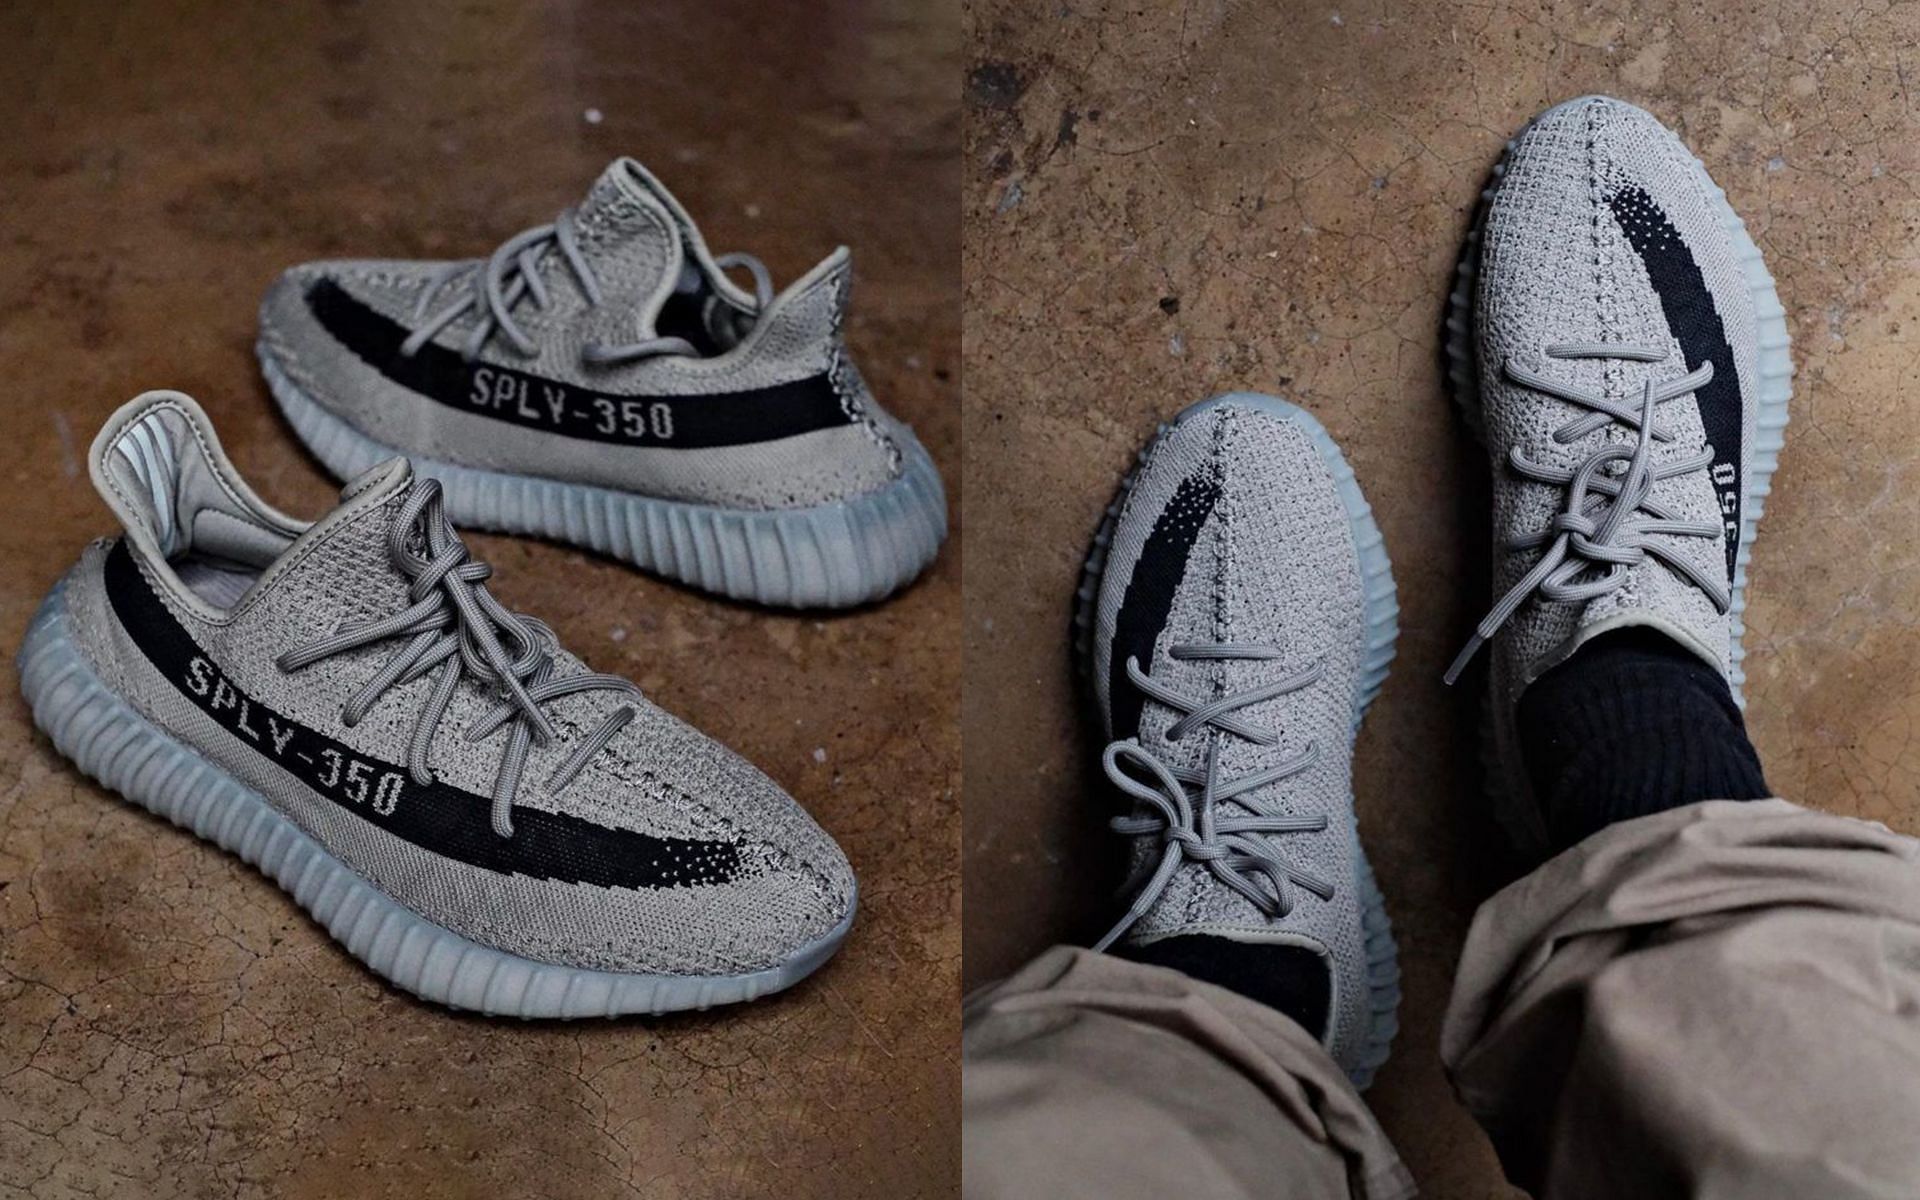 Where to buy Adidas BOOST V2 Granite shoes? Price details explored